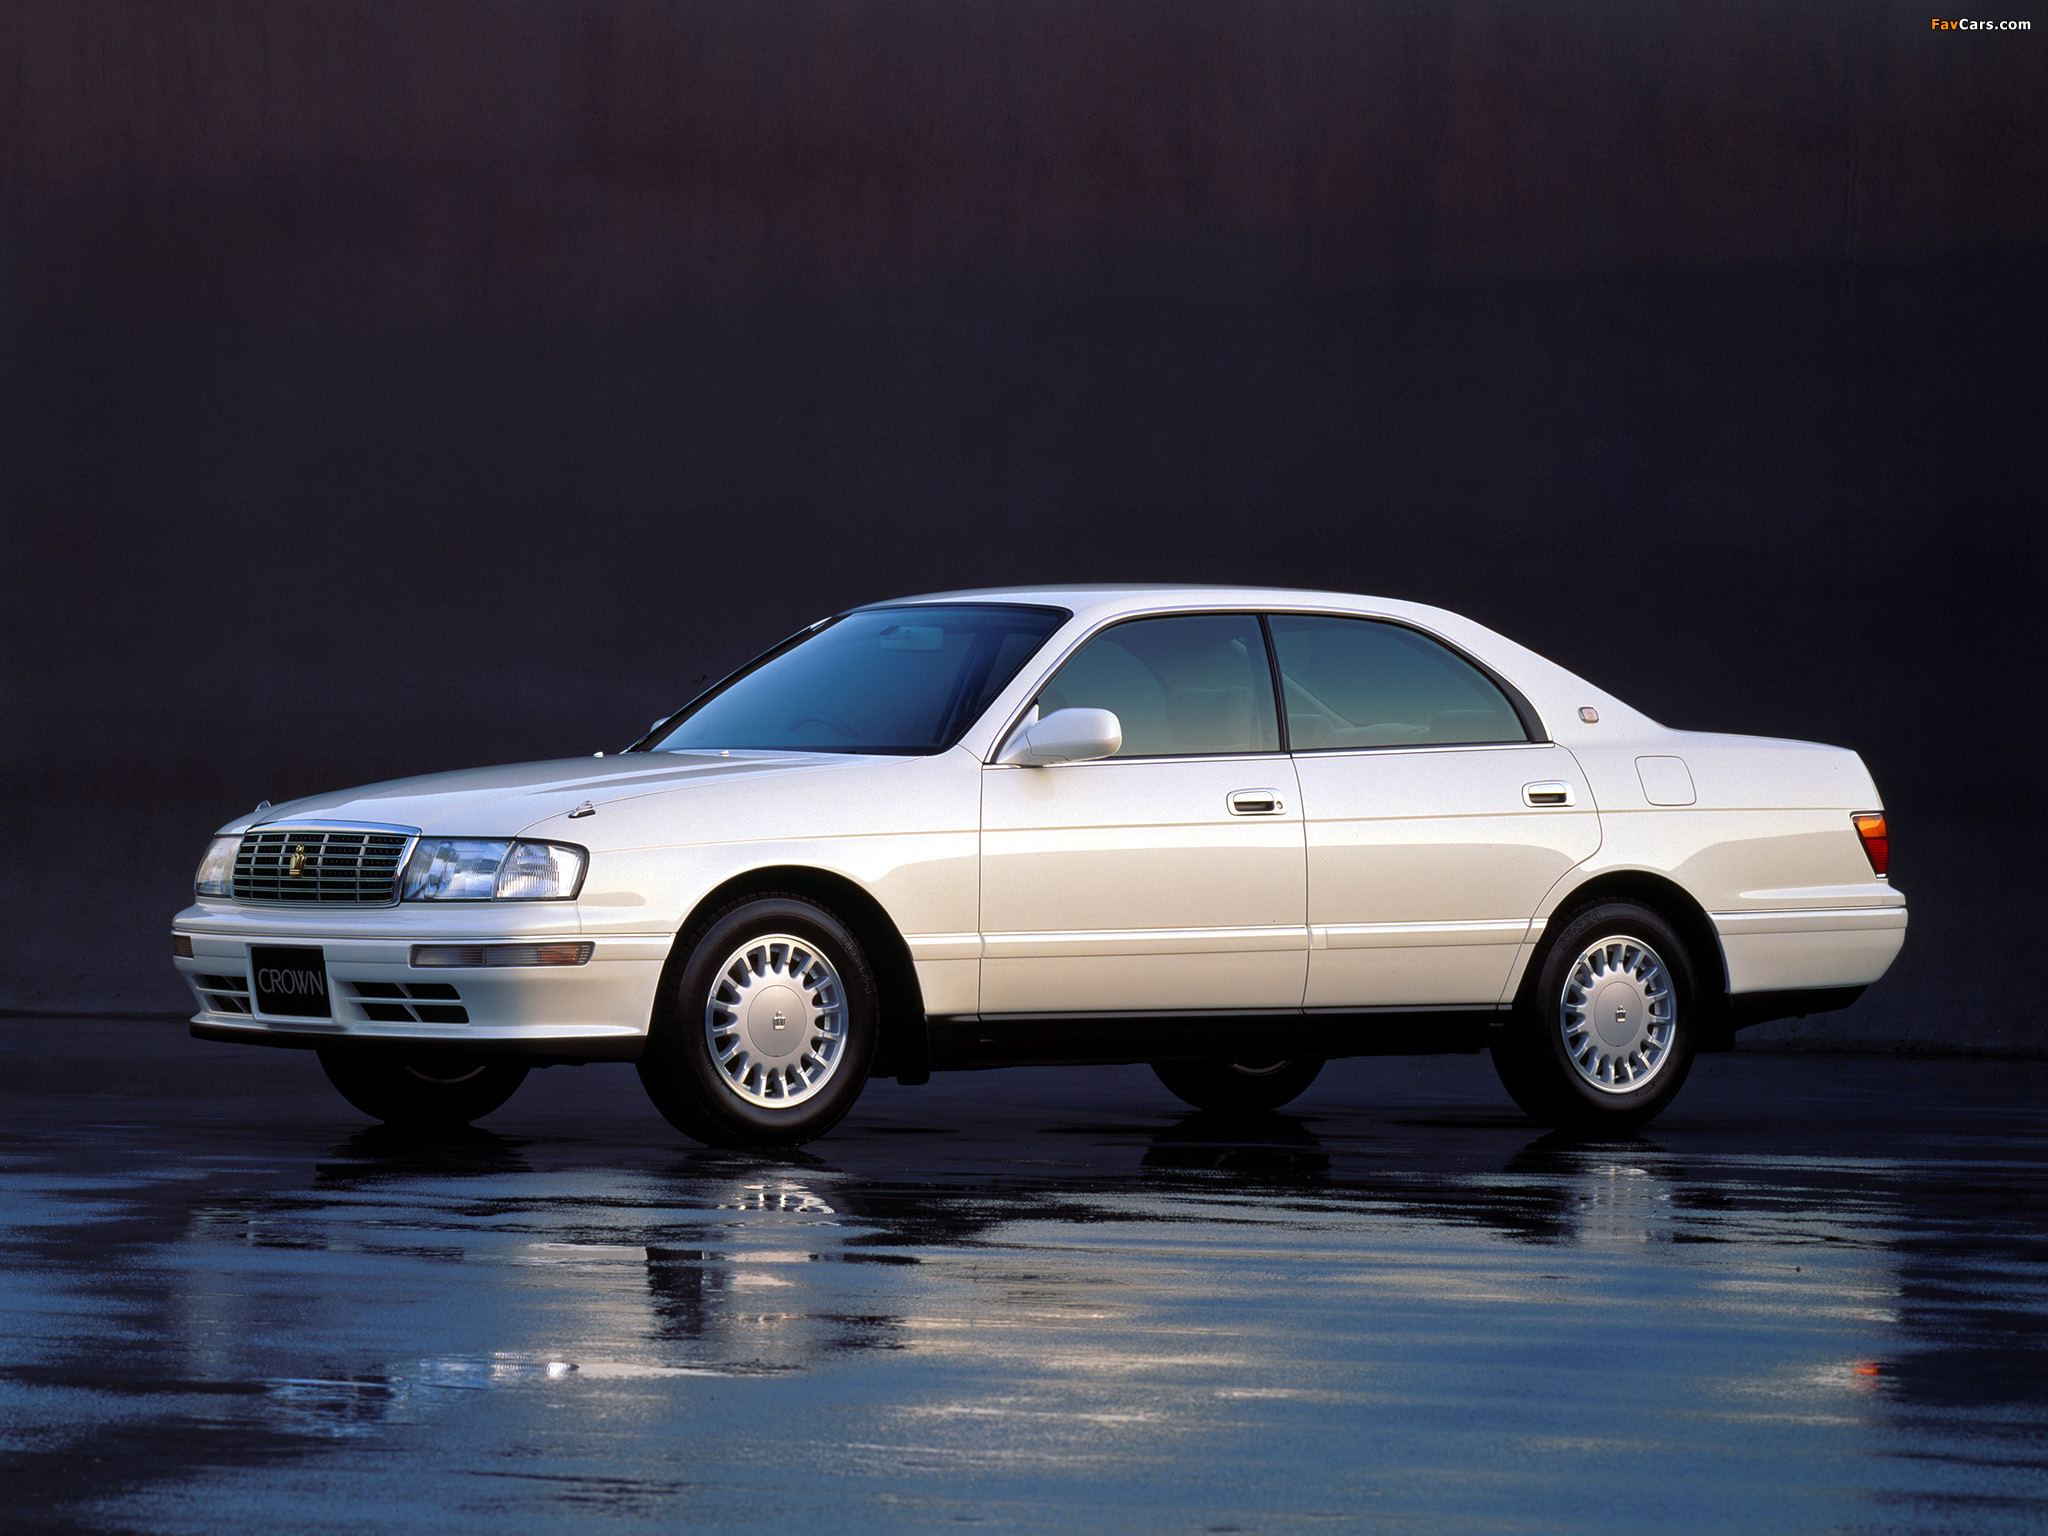 Toyota Crown (S140) 1993-95 pictures (2048x1536)